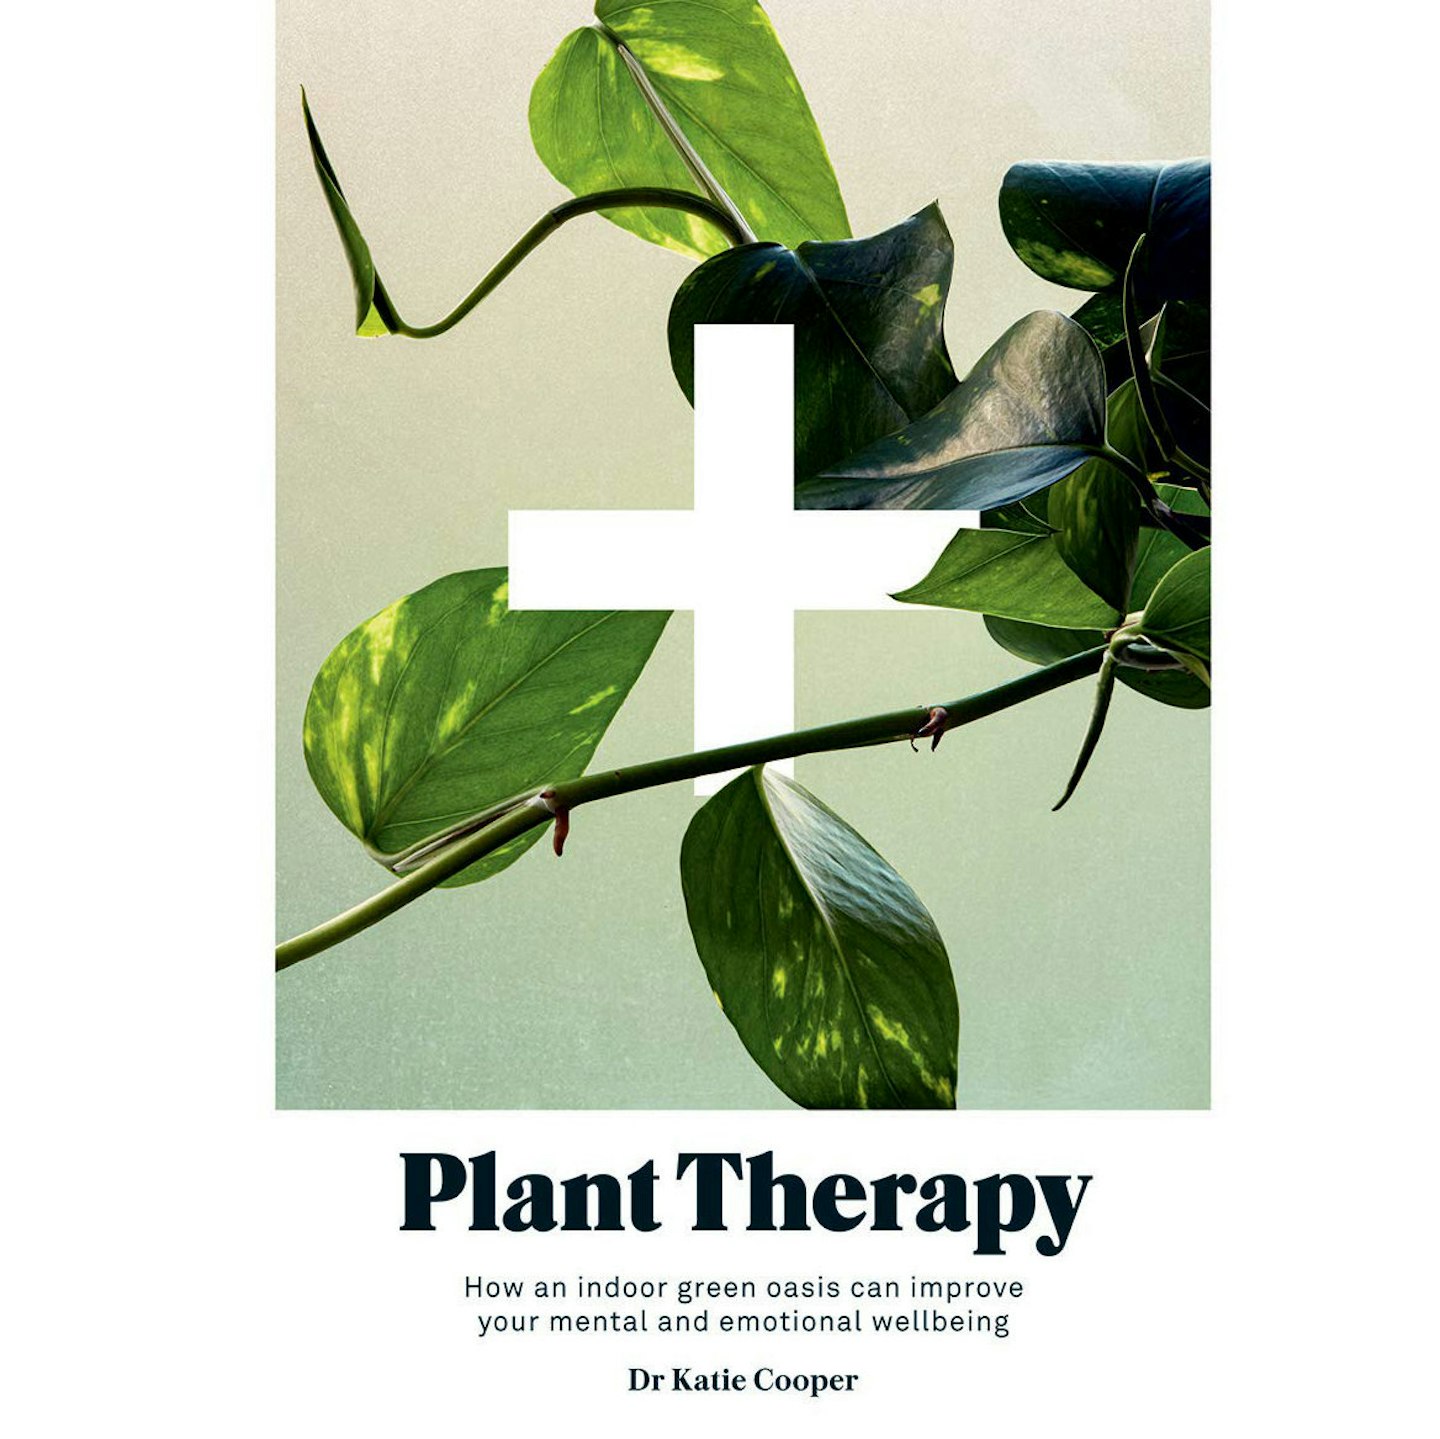 Plant Therapy by Dr Katie Cooper